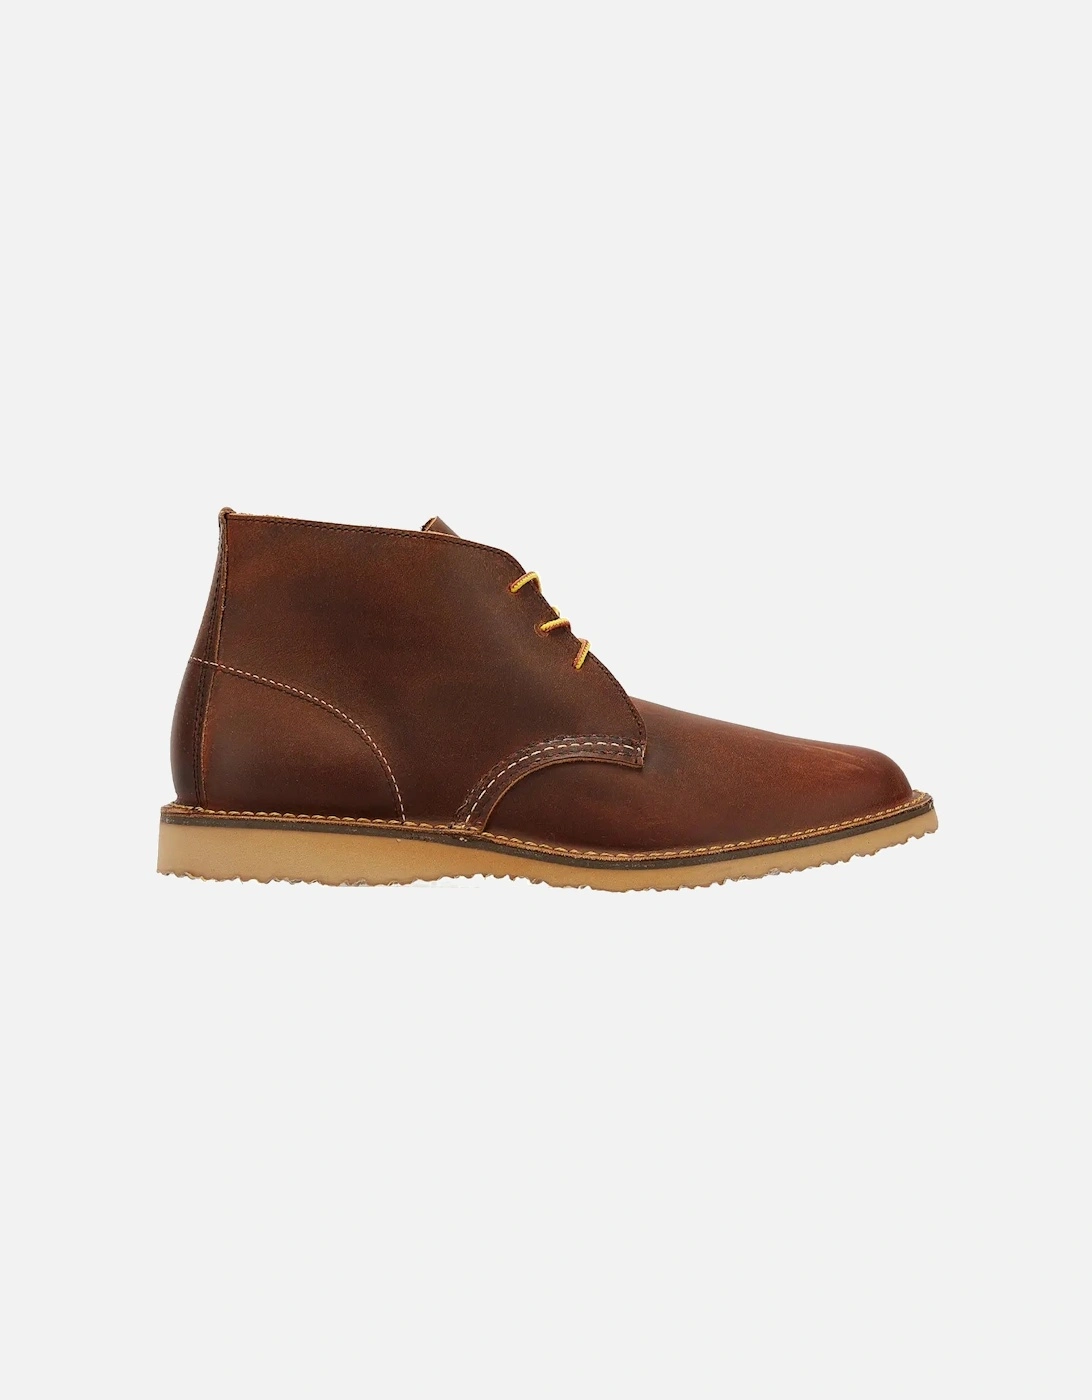 Shoes Weekender Chukka Copper R&T Men's Brown Boots